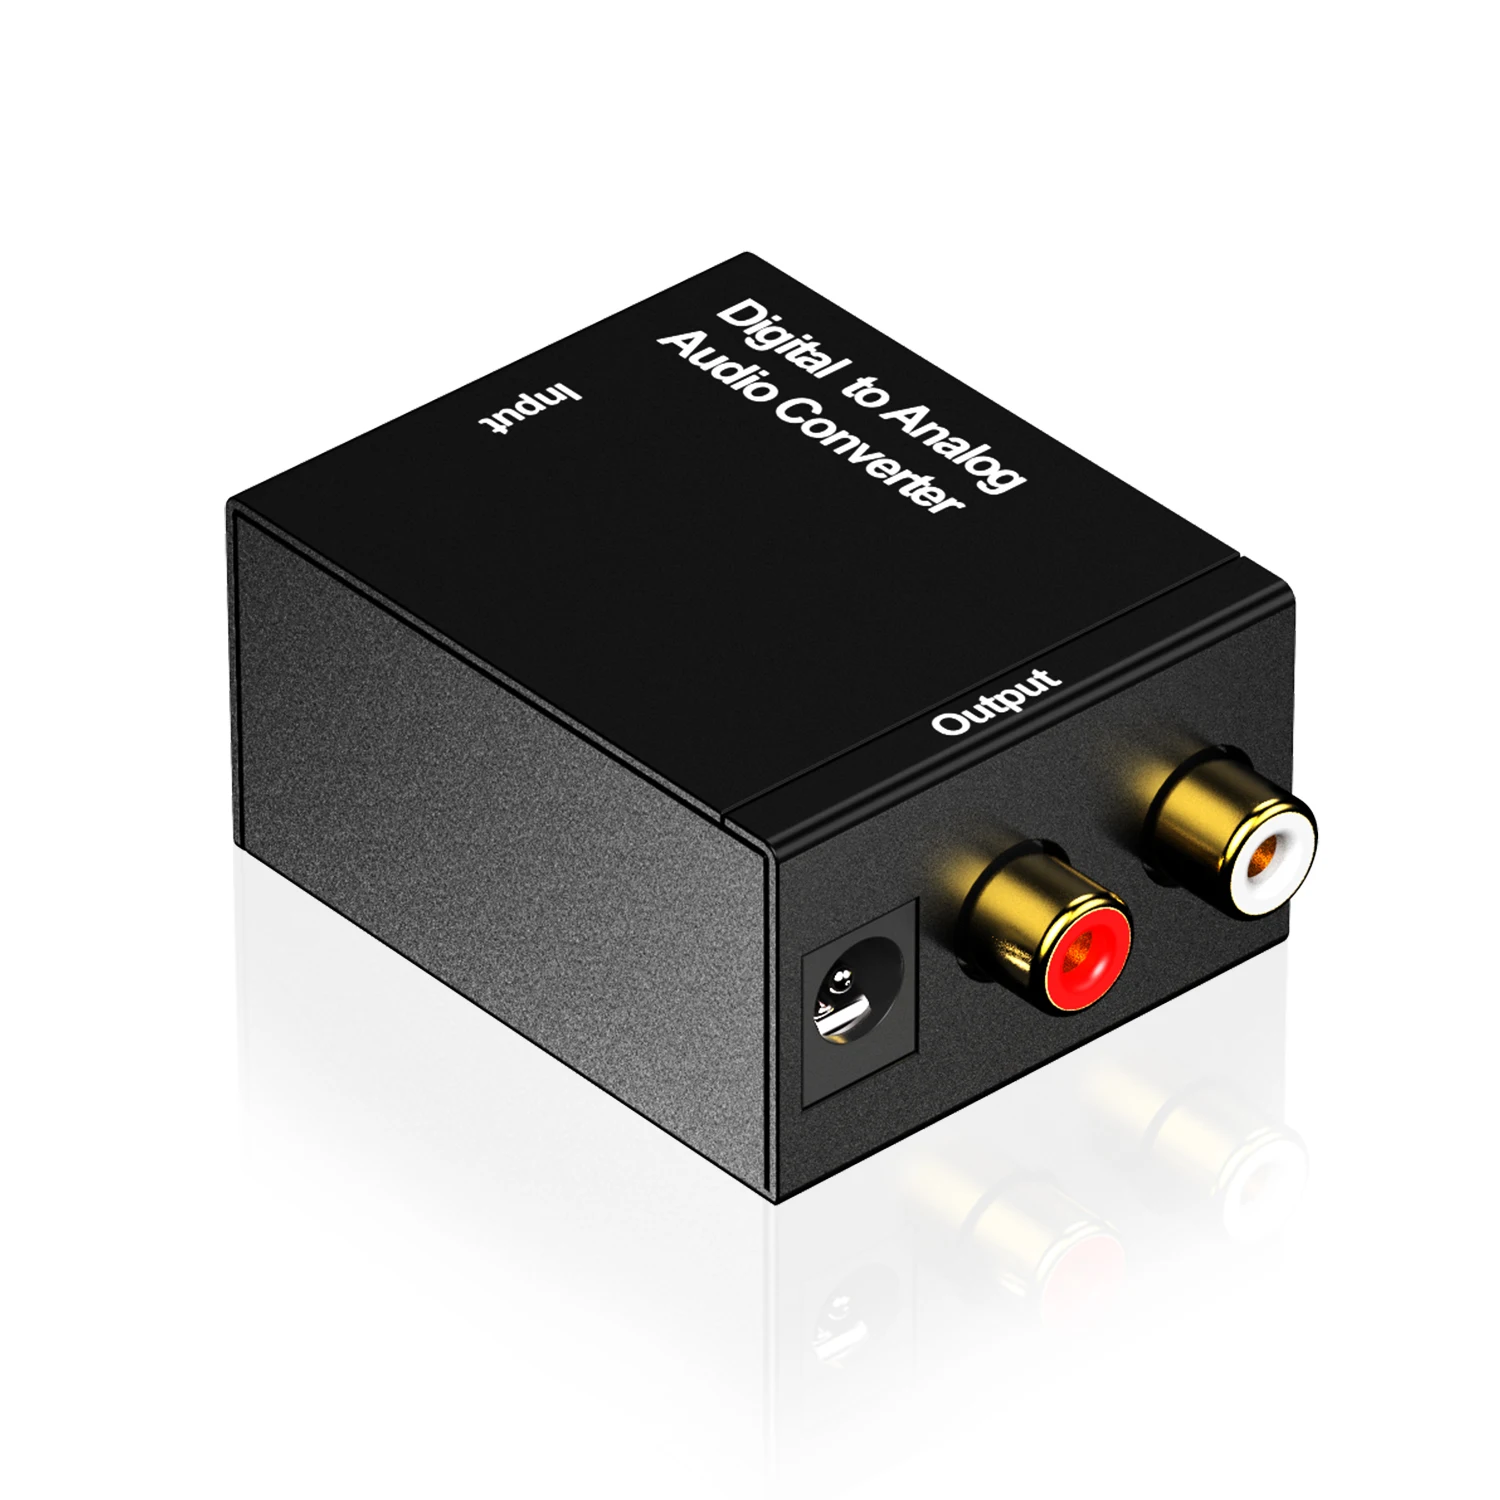 cooking visa allocation Hot Selling New Arrival 3.5mm Optical Coaxial Digital To Analog Audio  Converter Dac Digital Toslink To Analog Stereo L/r Adapter - Buy Digital To  Analog Audio Converter,Digital Toslink To Analog Converter,Coaxia Toslink